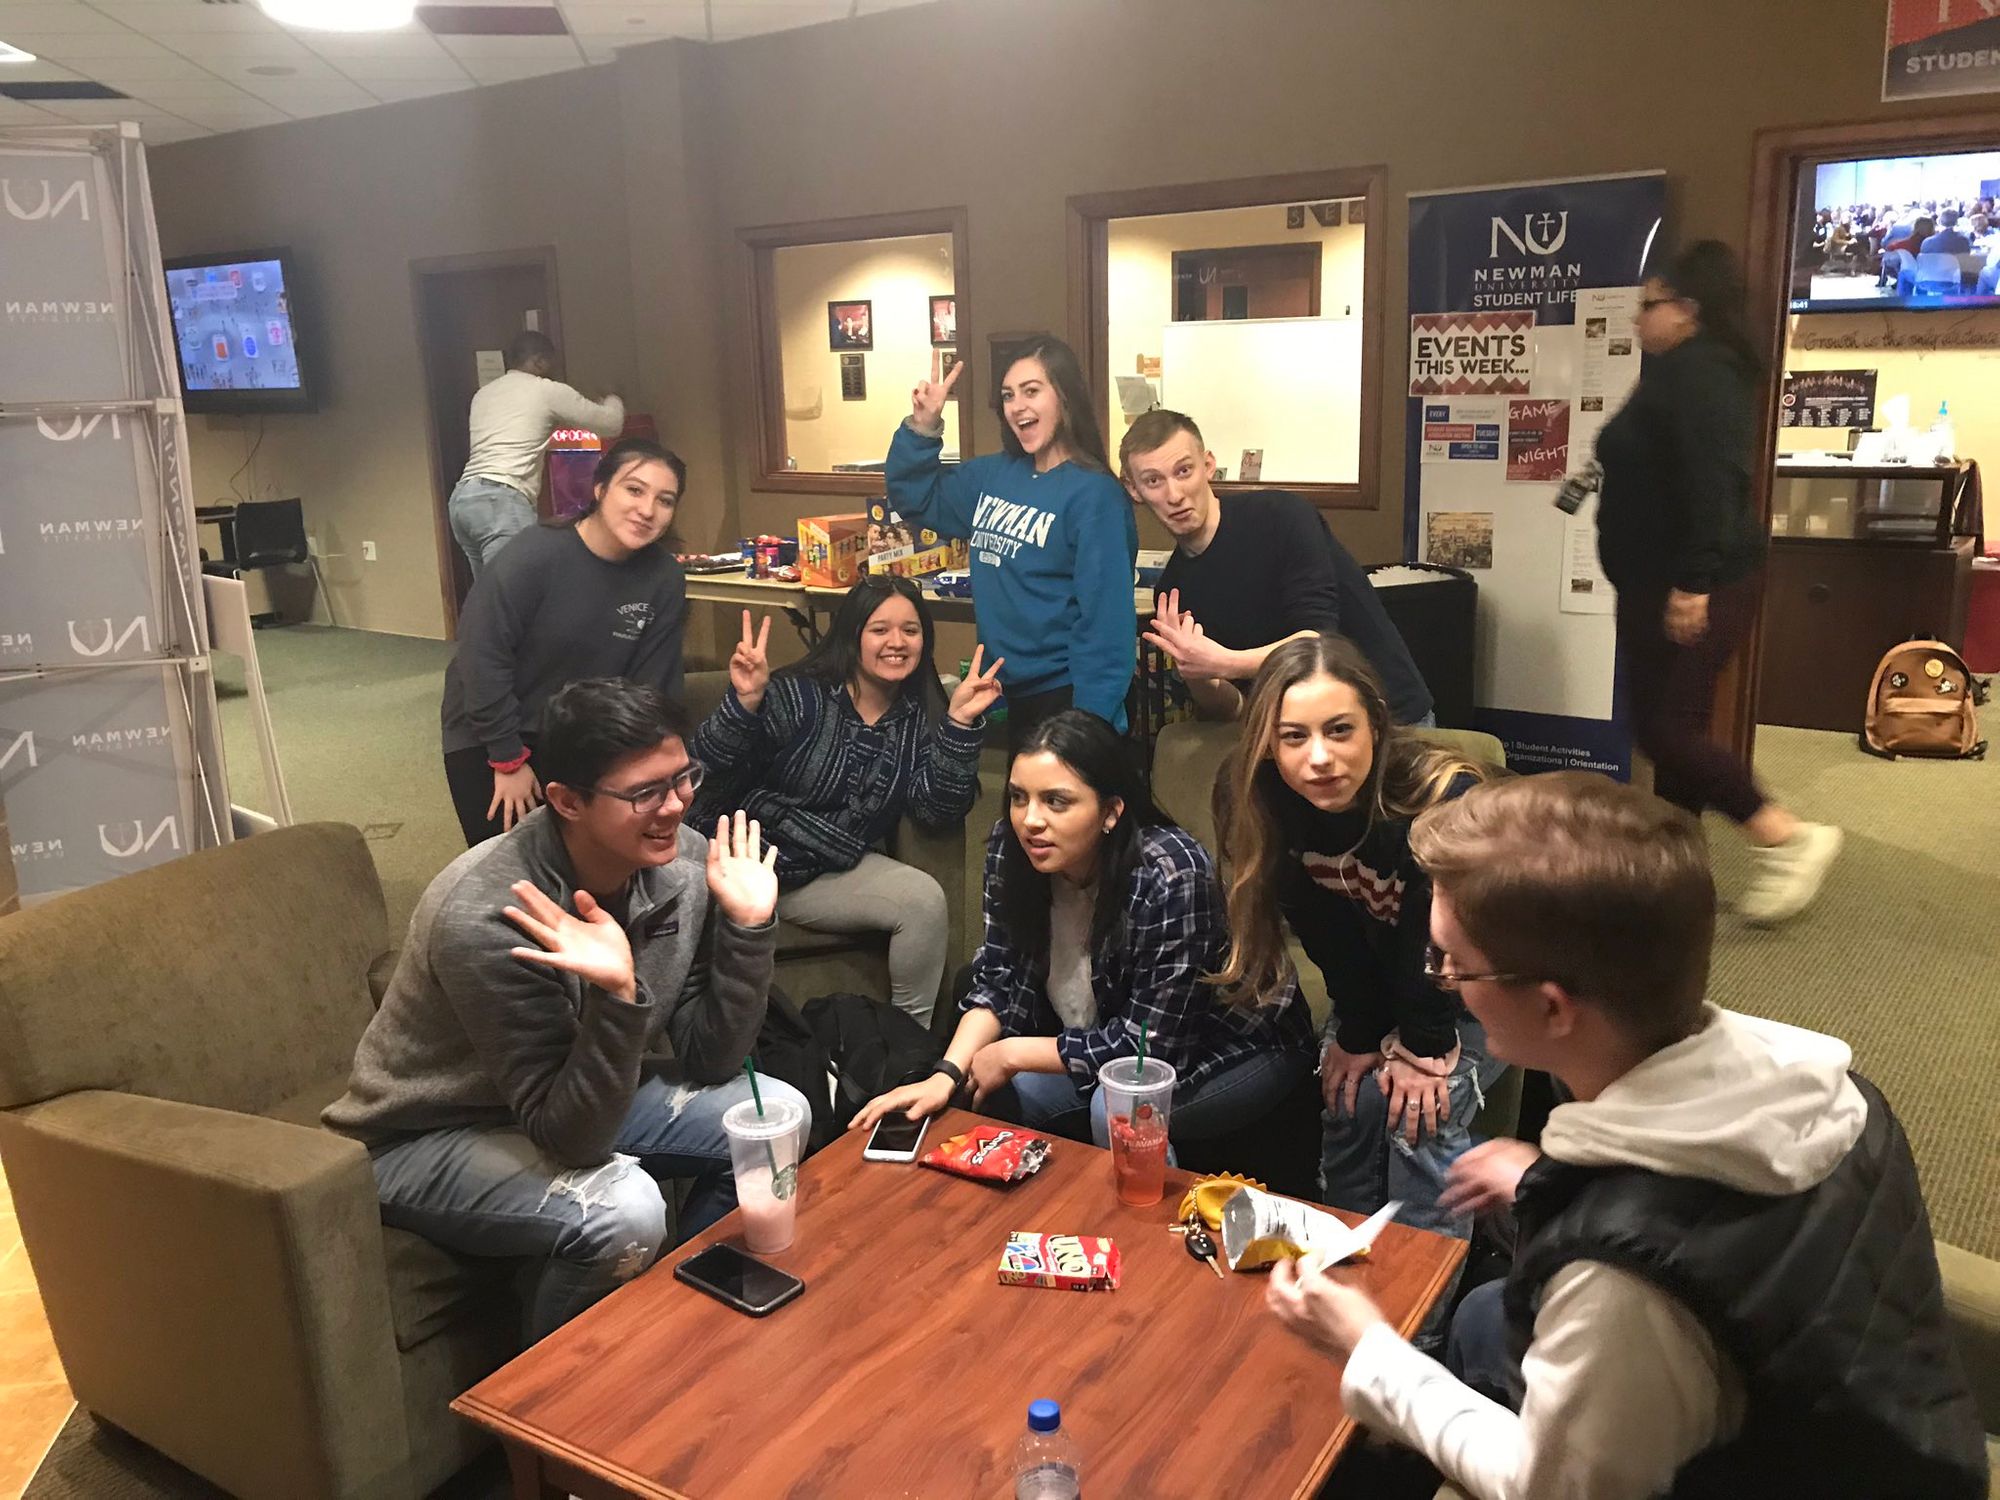 Accepted students gear up for game night